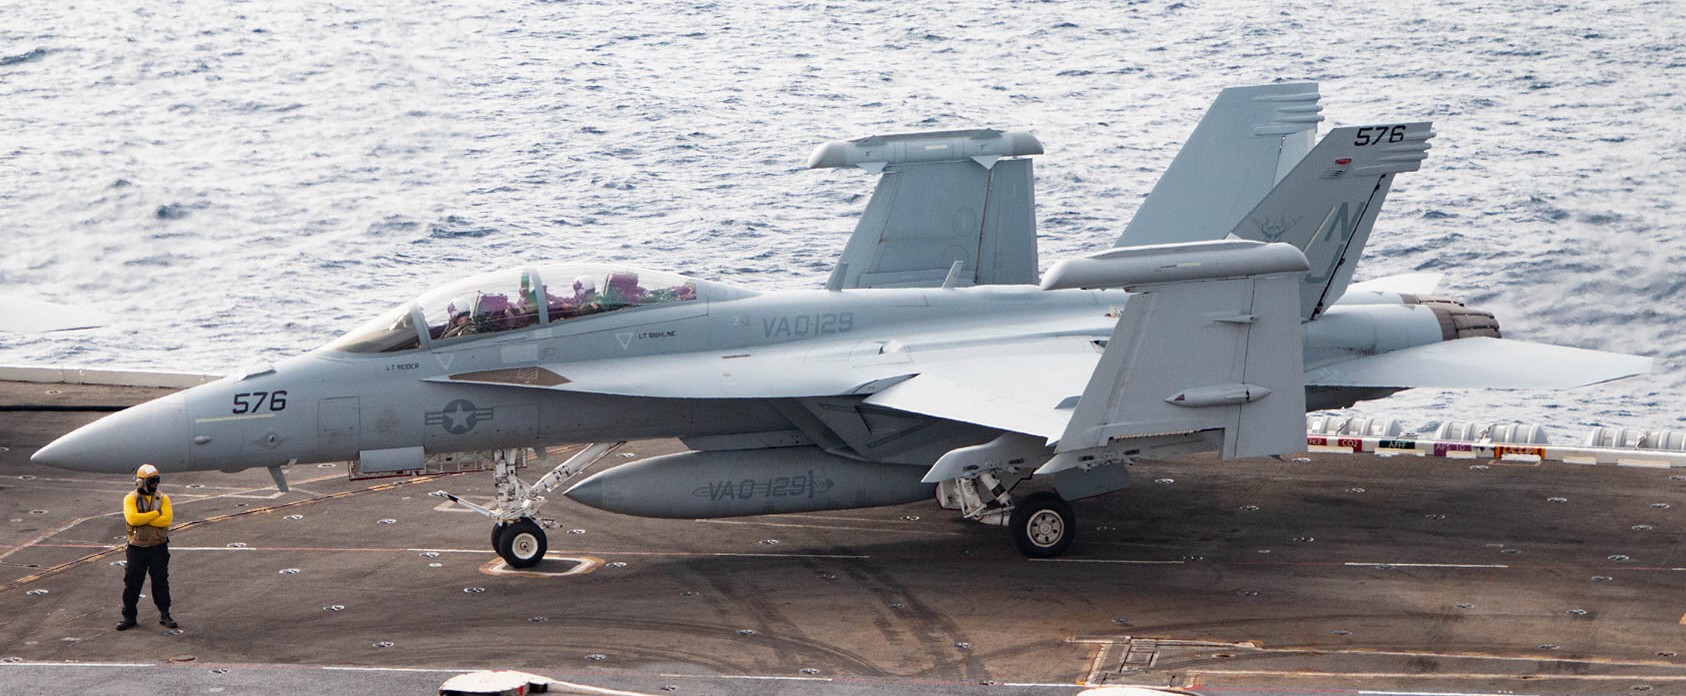 vaq-129 vikings electronic attack squadron fleet replacement frs us navy ea-18g growler 19 cvn-71 uss theodore roosevelt